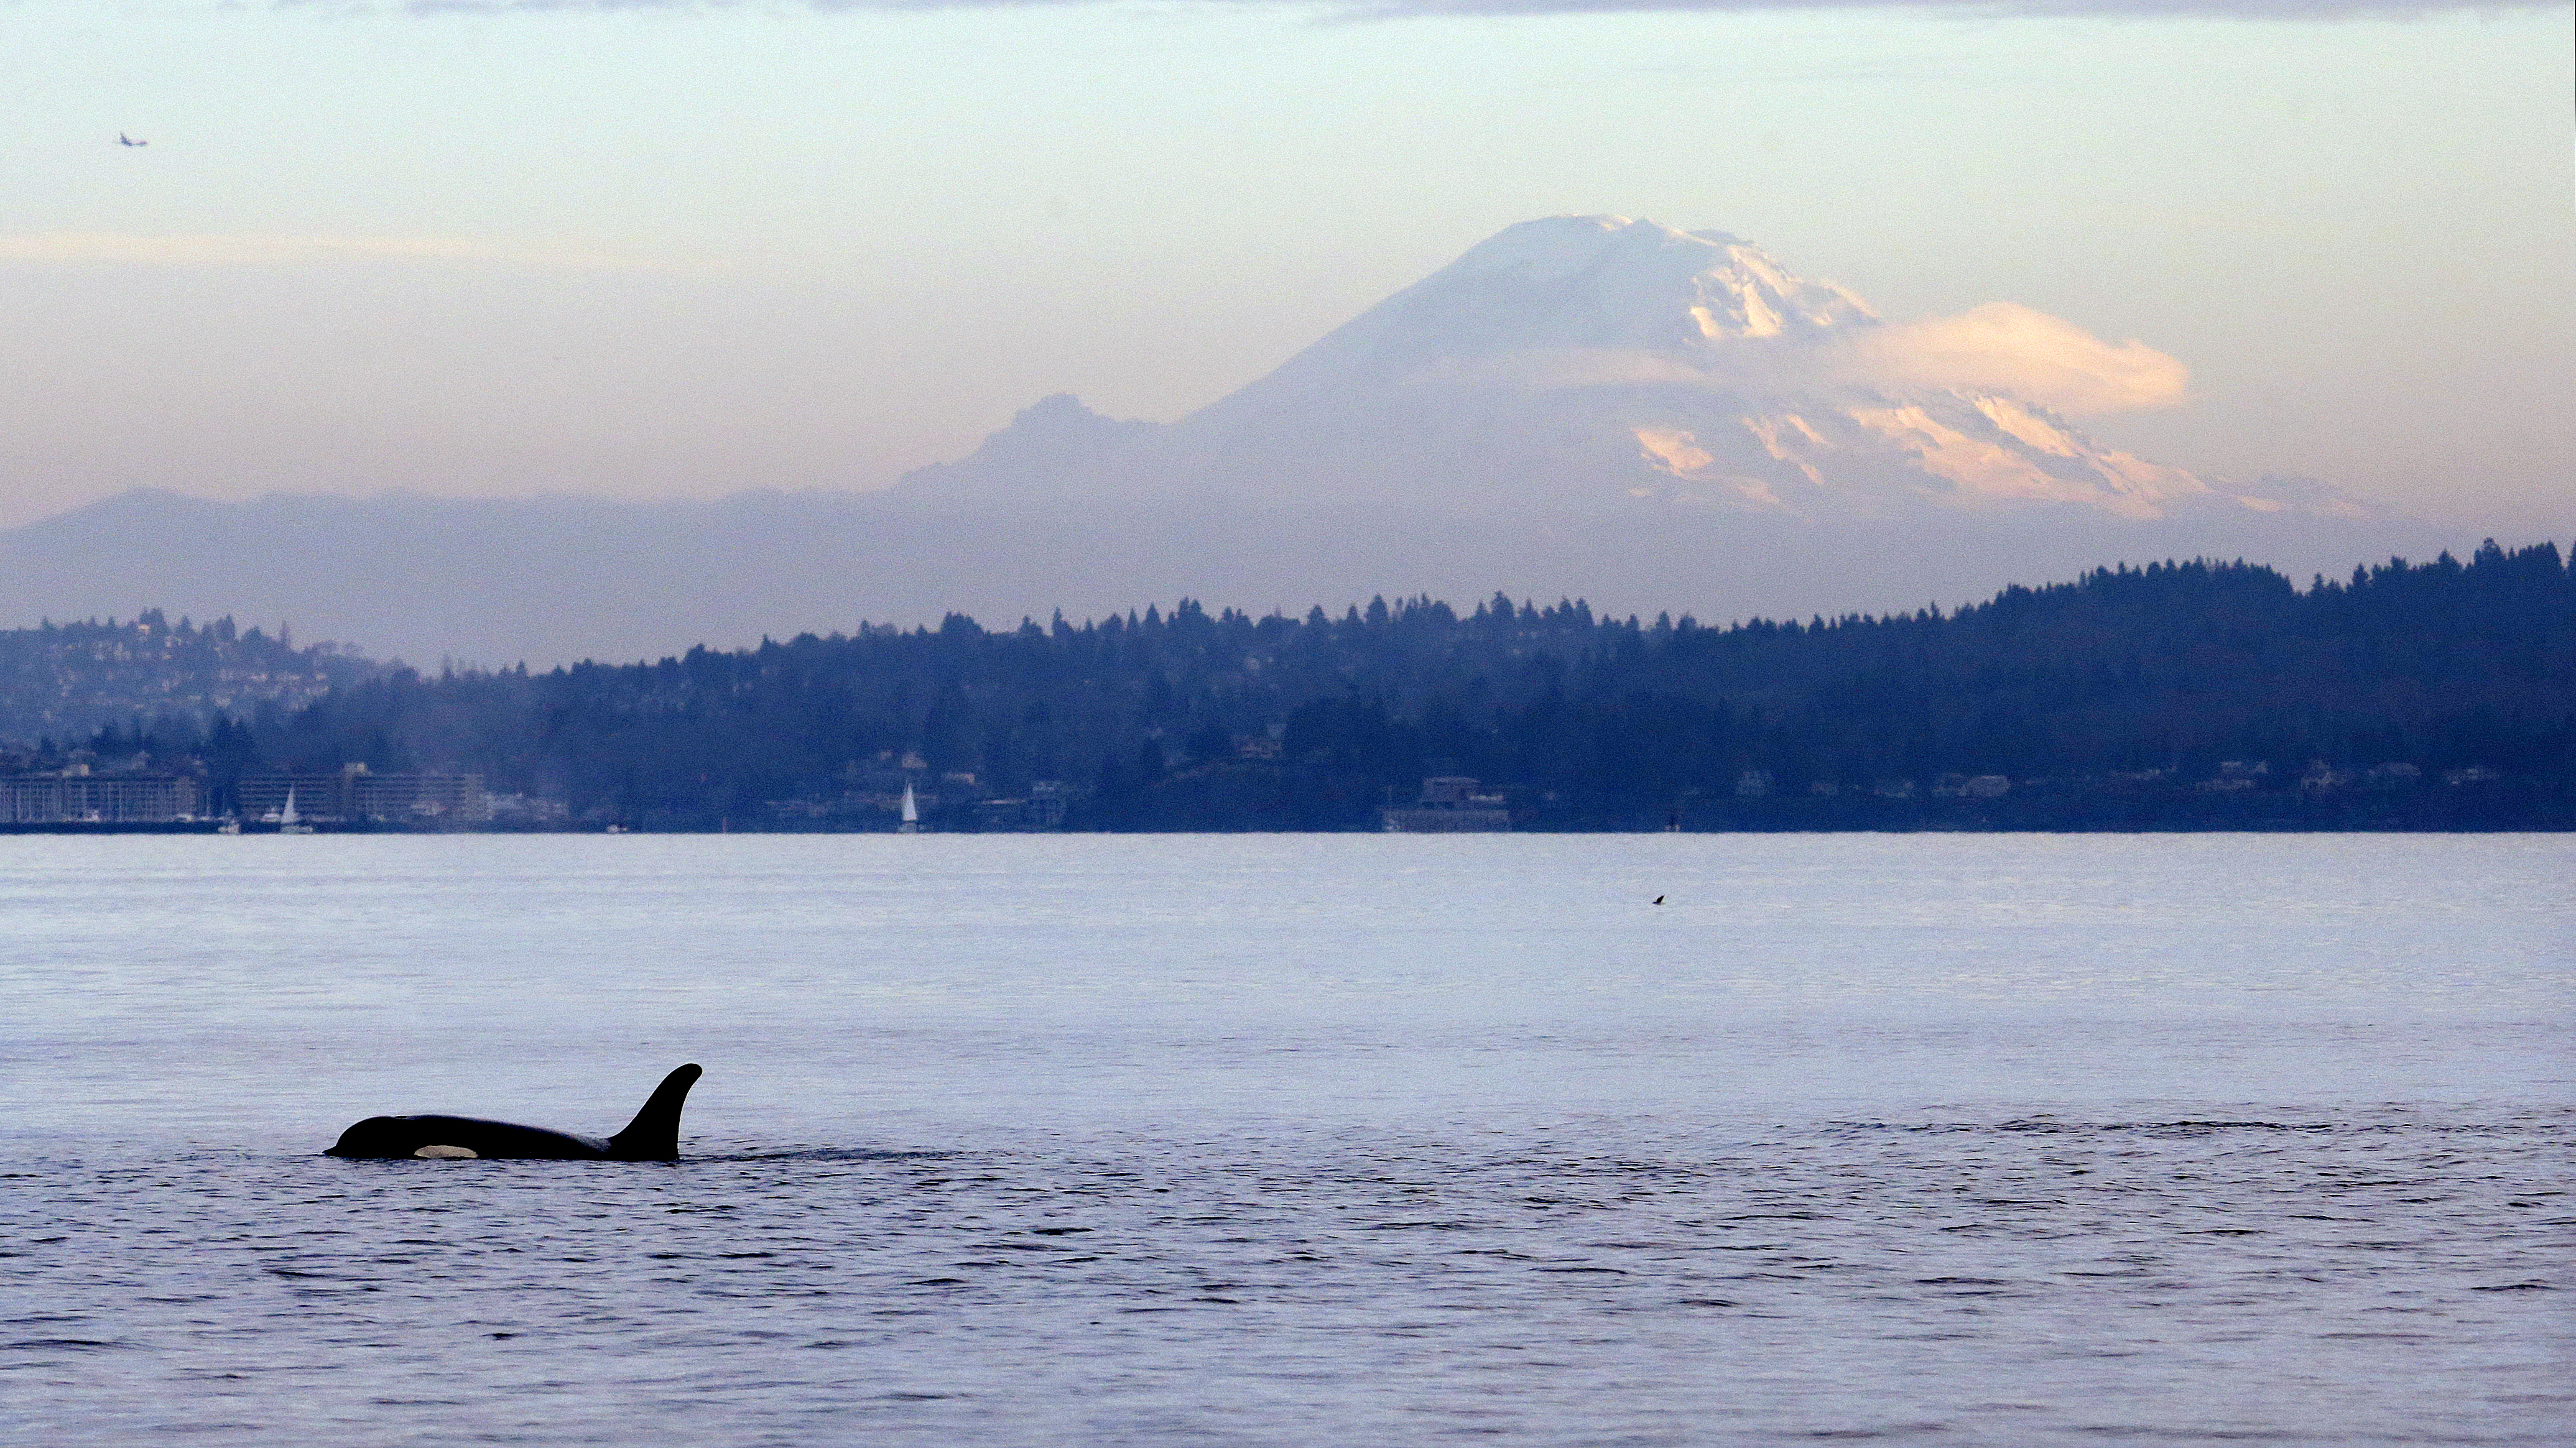 A southern resident orca whale swims in Puget Sound in view of Mount Rainier in 2014. CREDIT: Elaine Thompson/AP